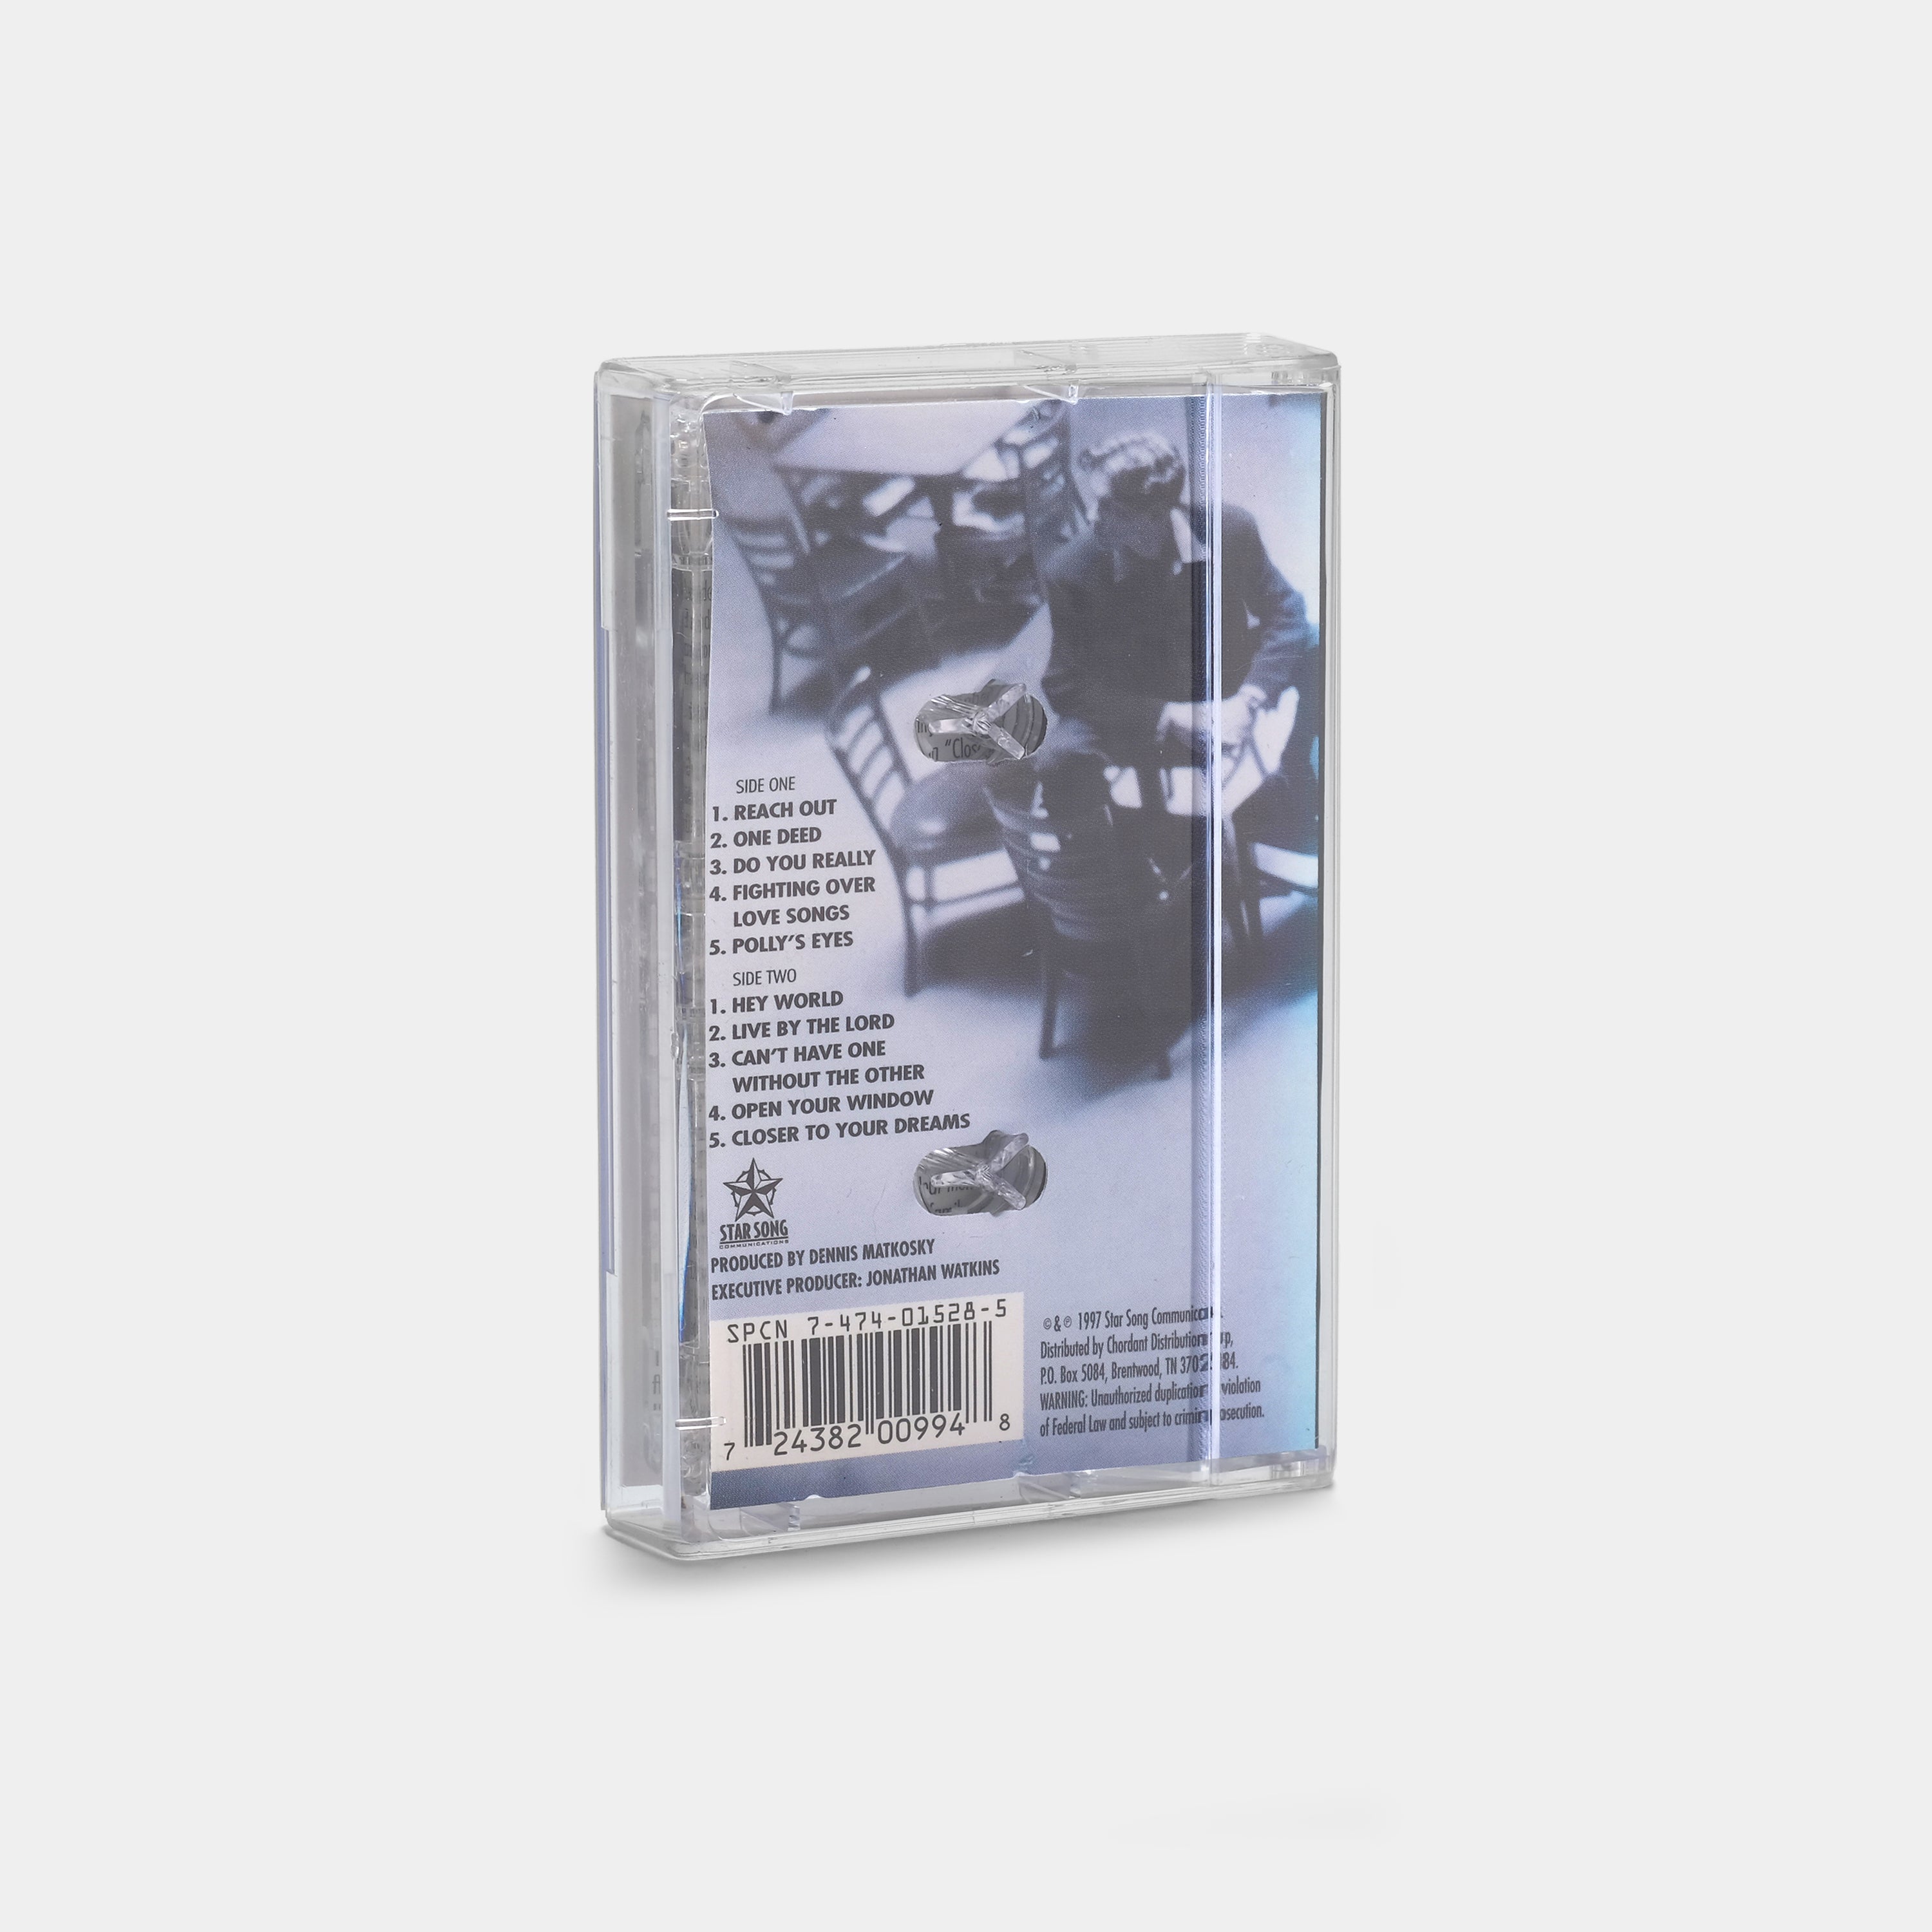 Tony Vincent - One Deed Cassette Tape